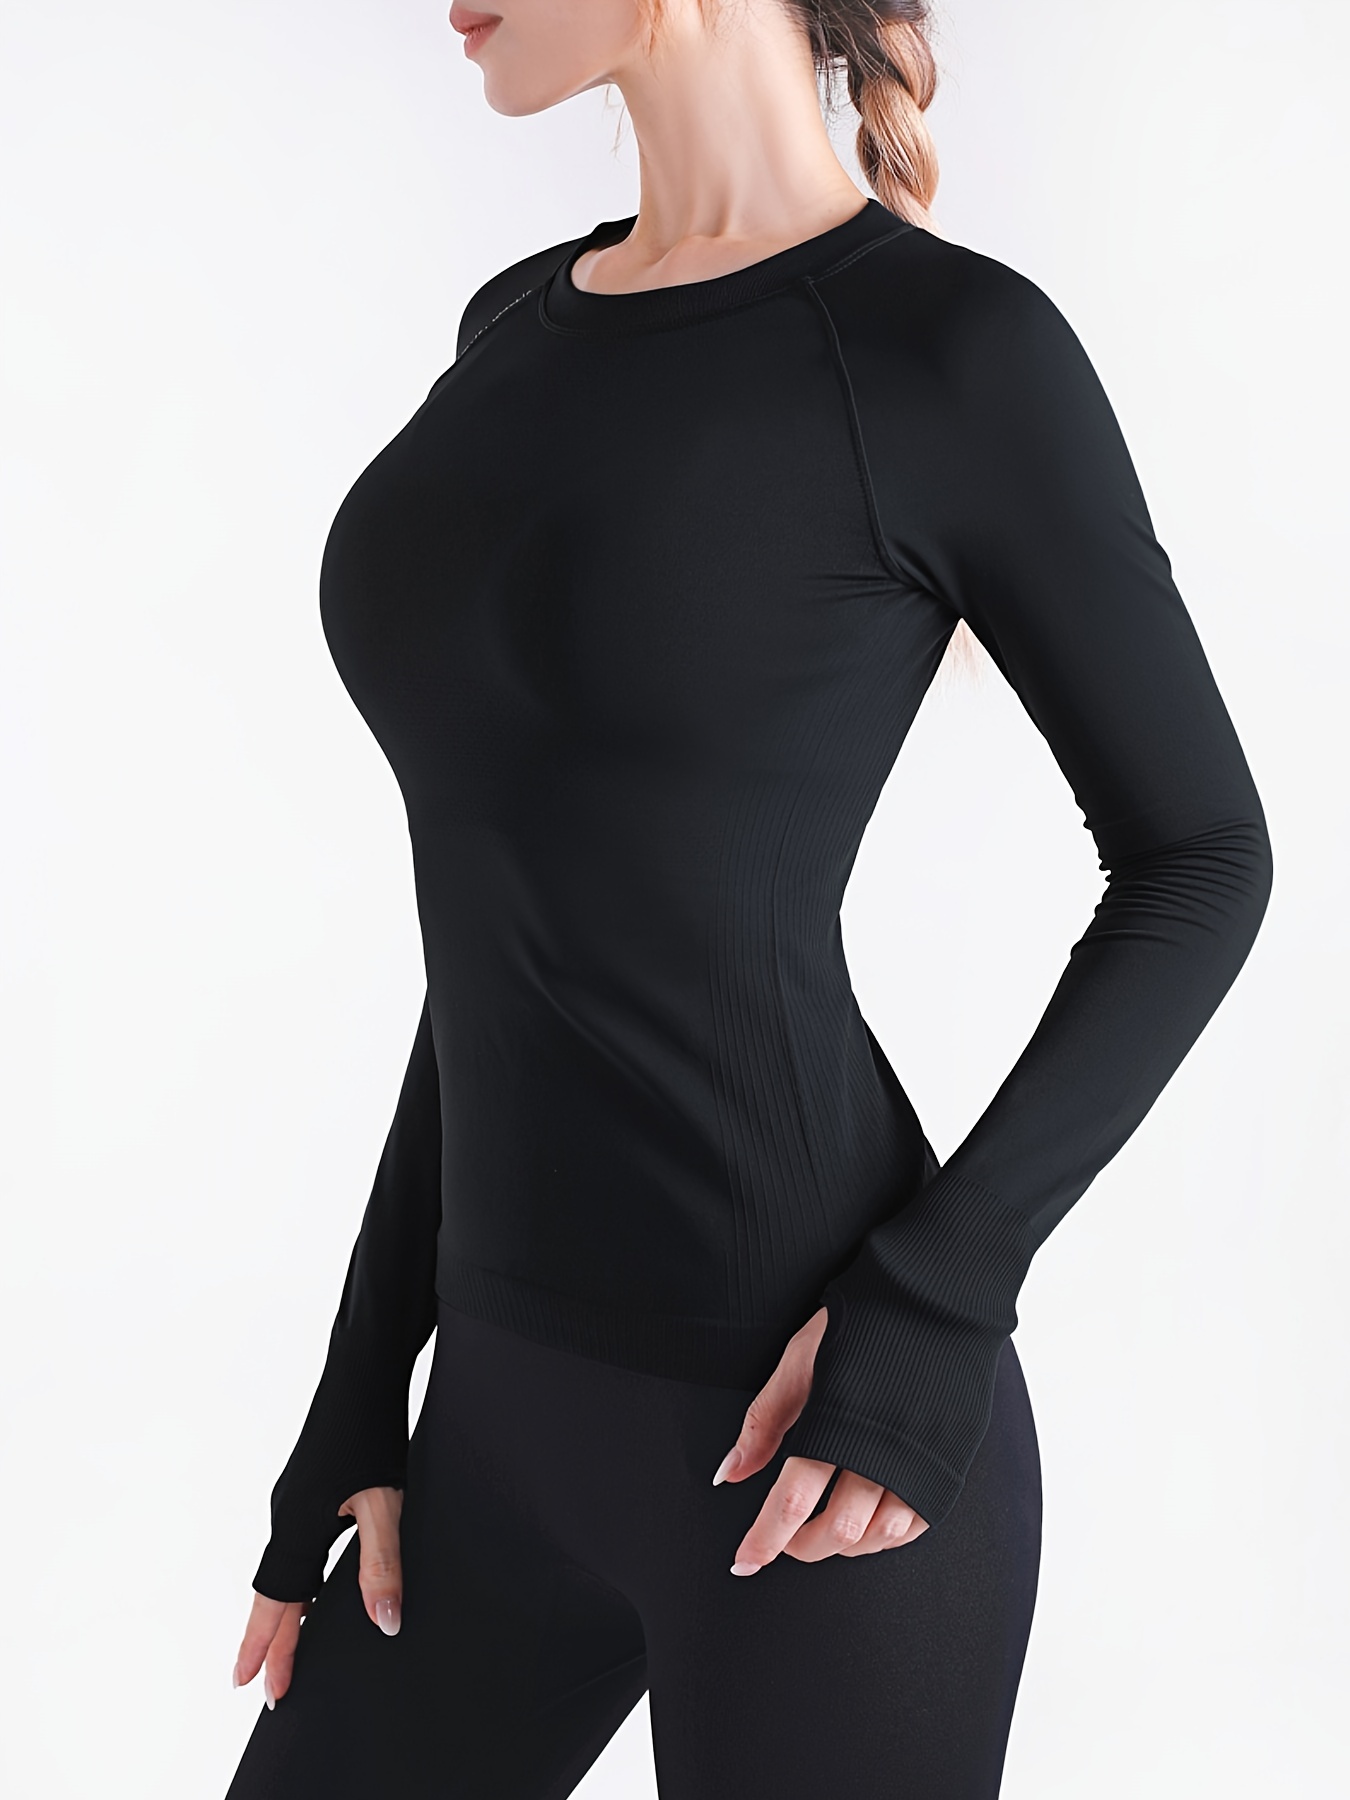 Women's Glossy Silky Long Sleeves Gym Shirts Top Compression Workout Yoga  Tops